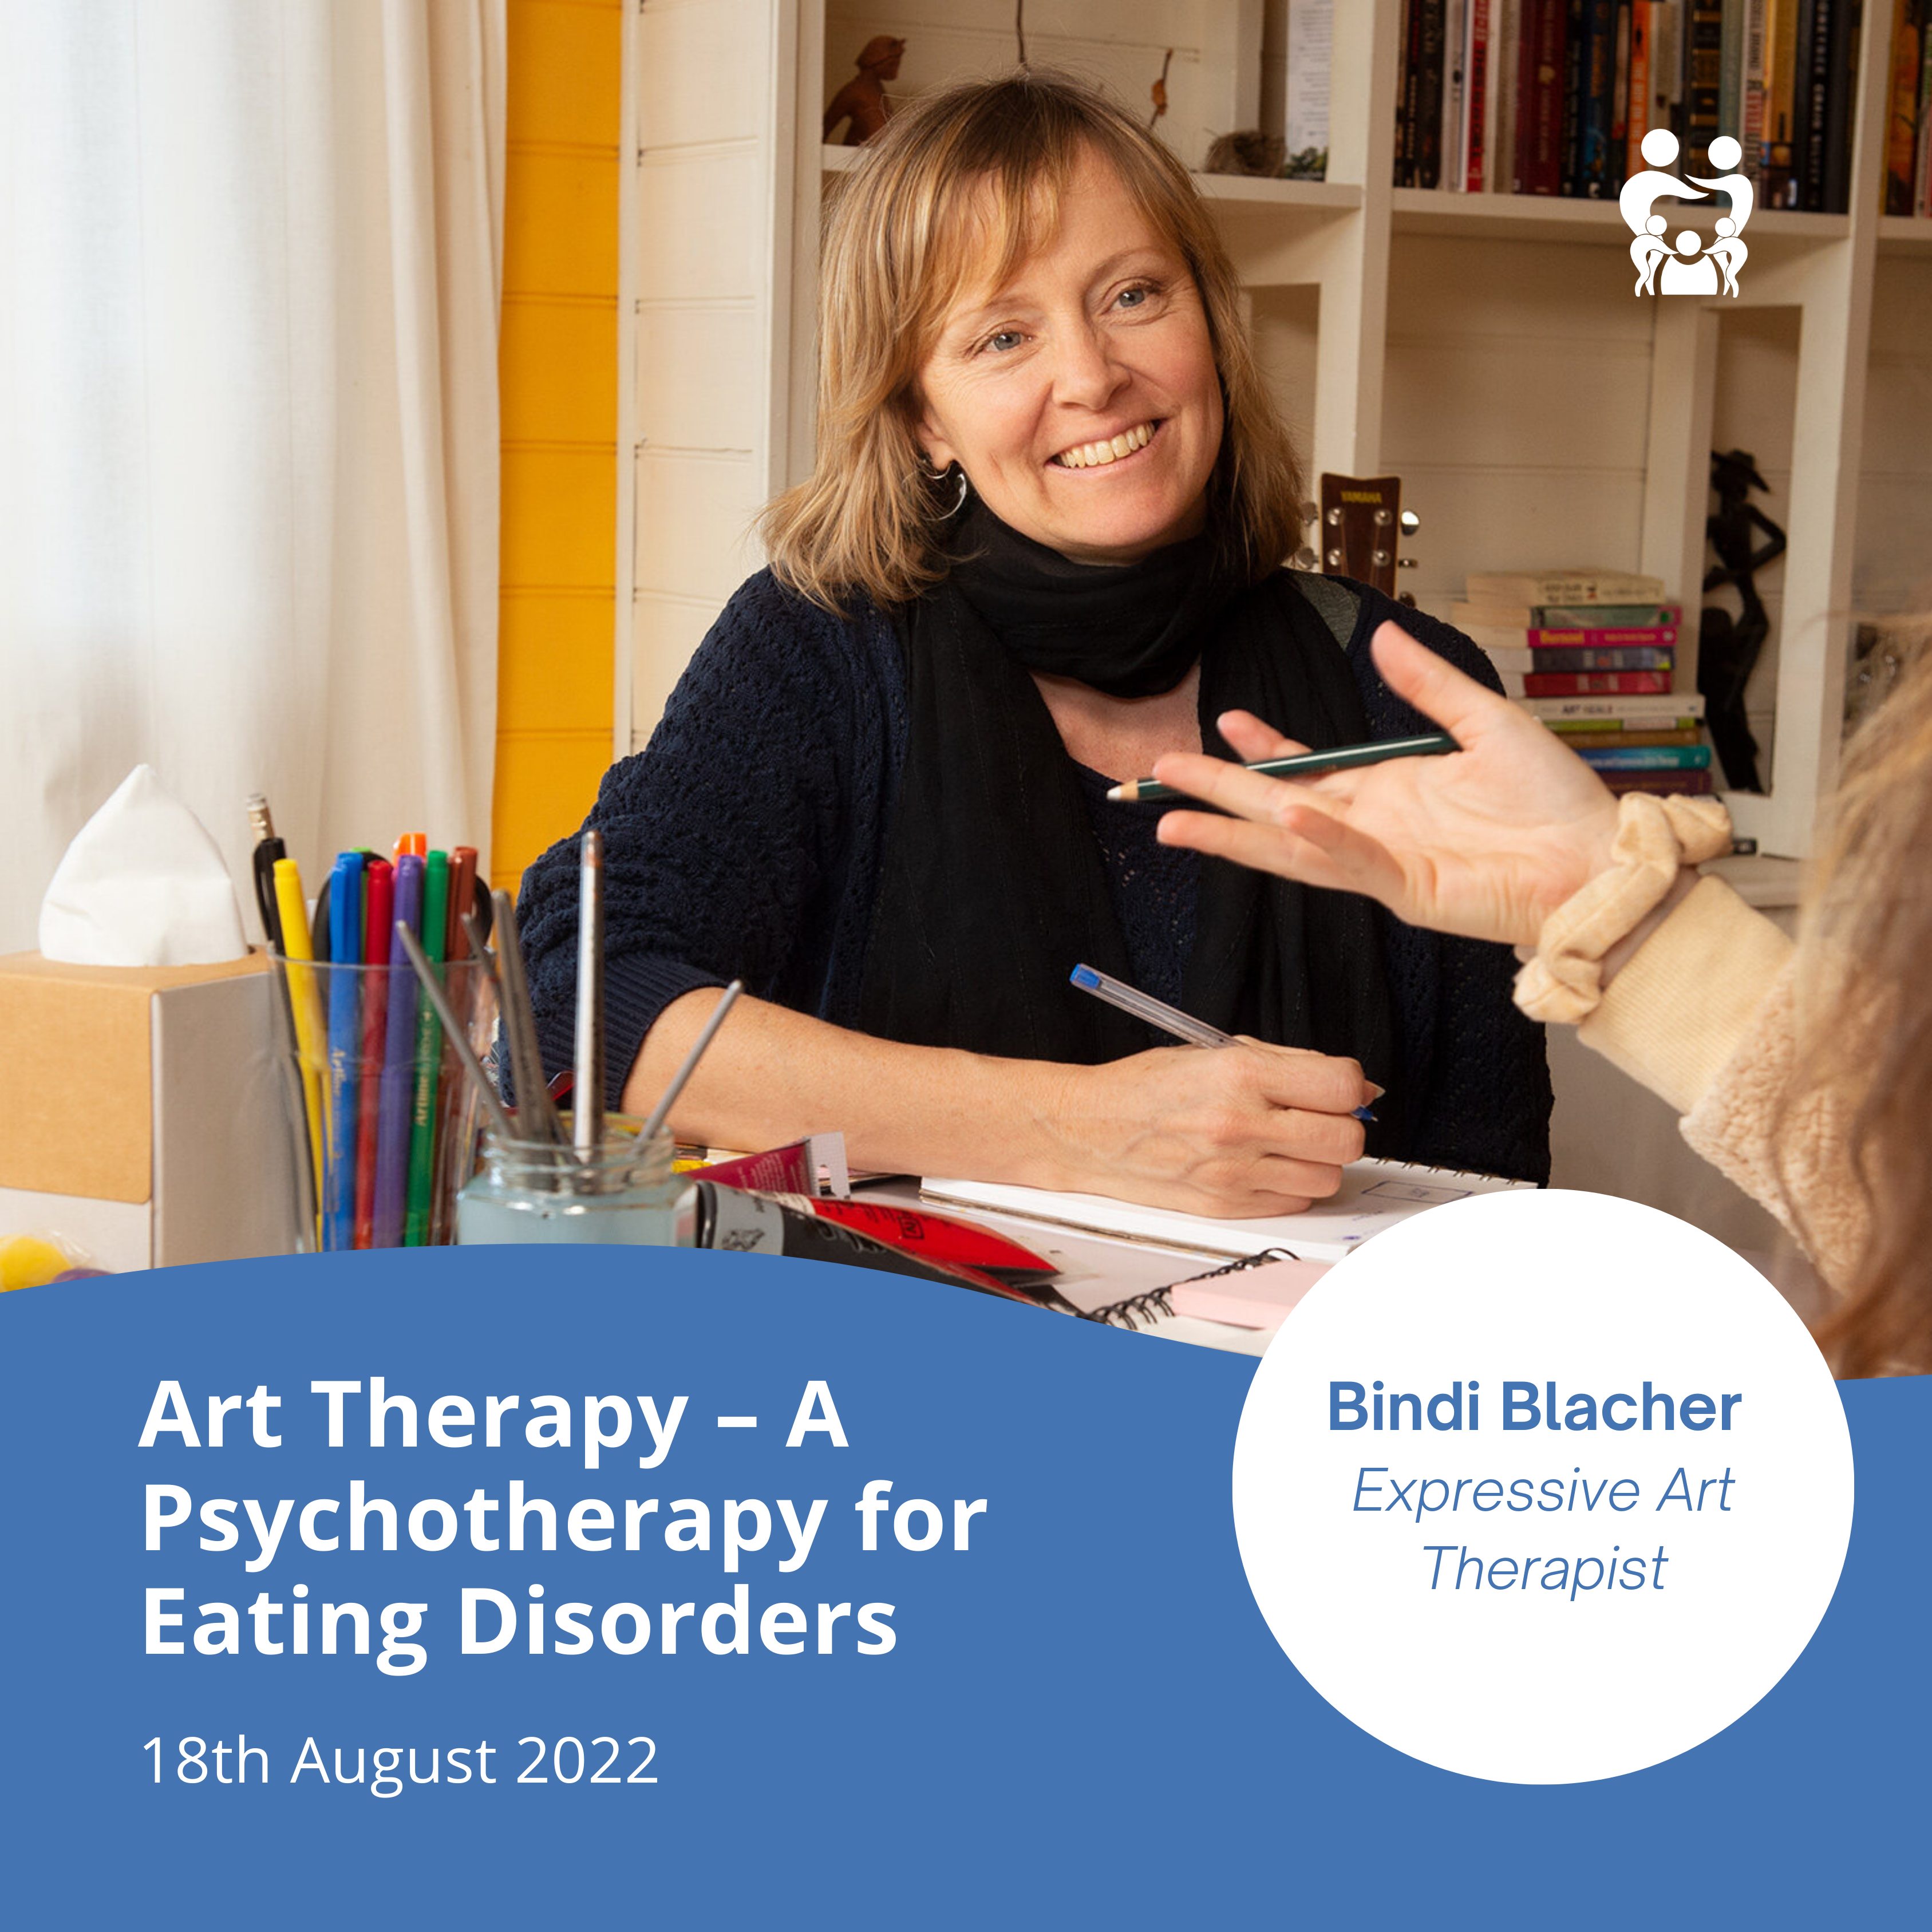 Art Therapy for Eating Disorders - Bindi Blacher 18 August 2022